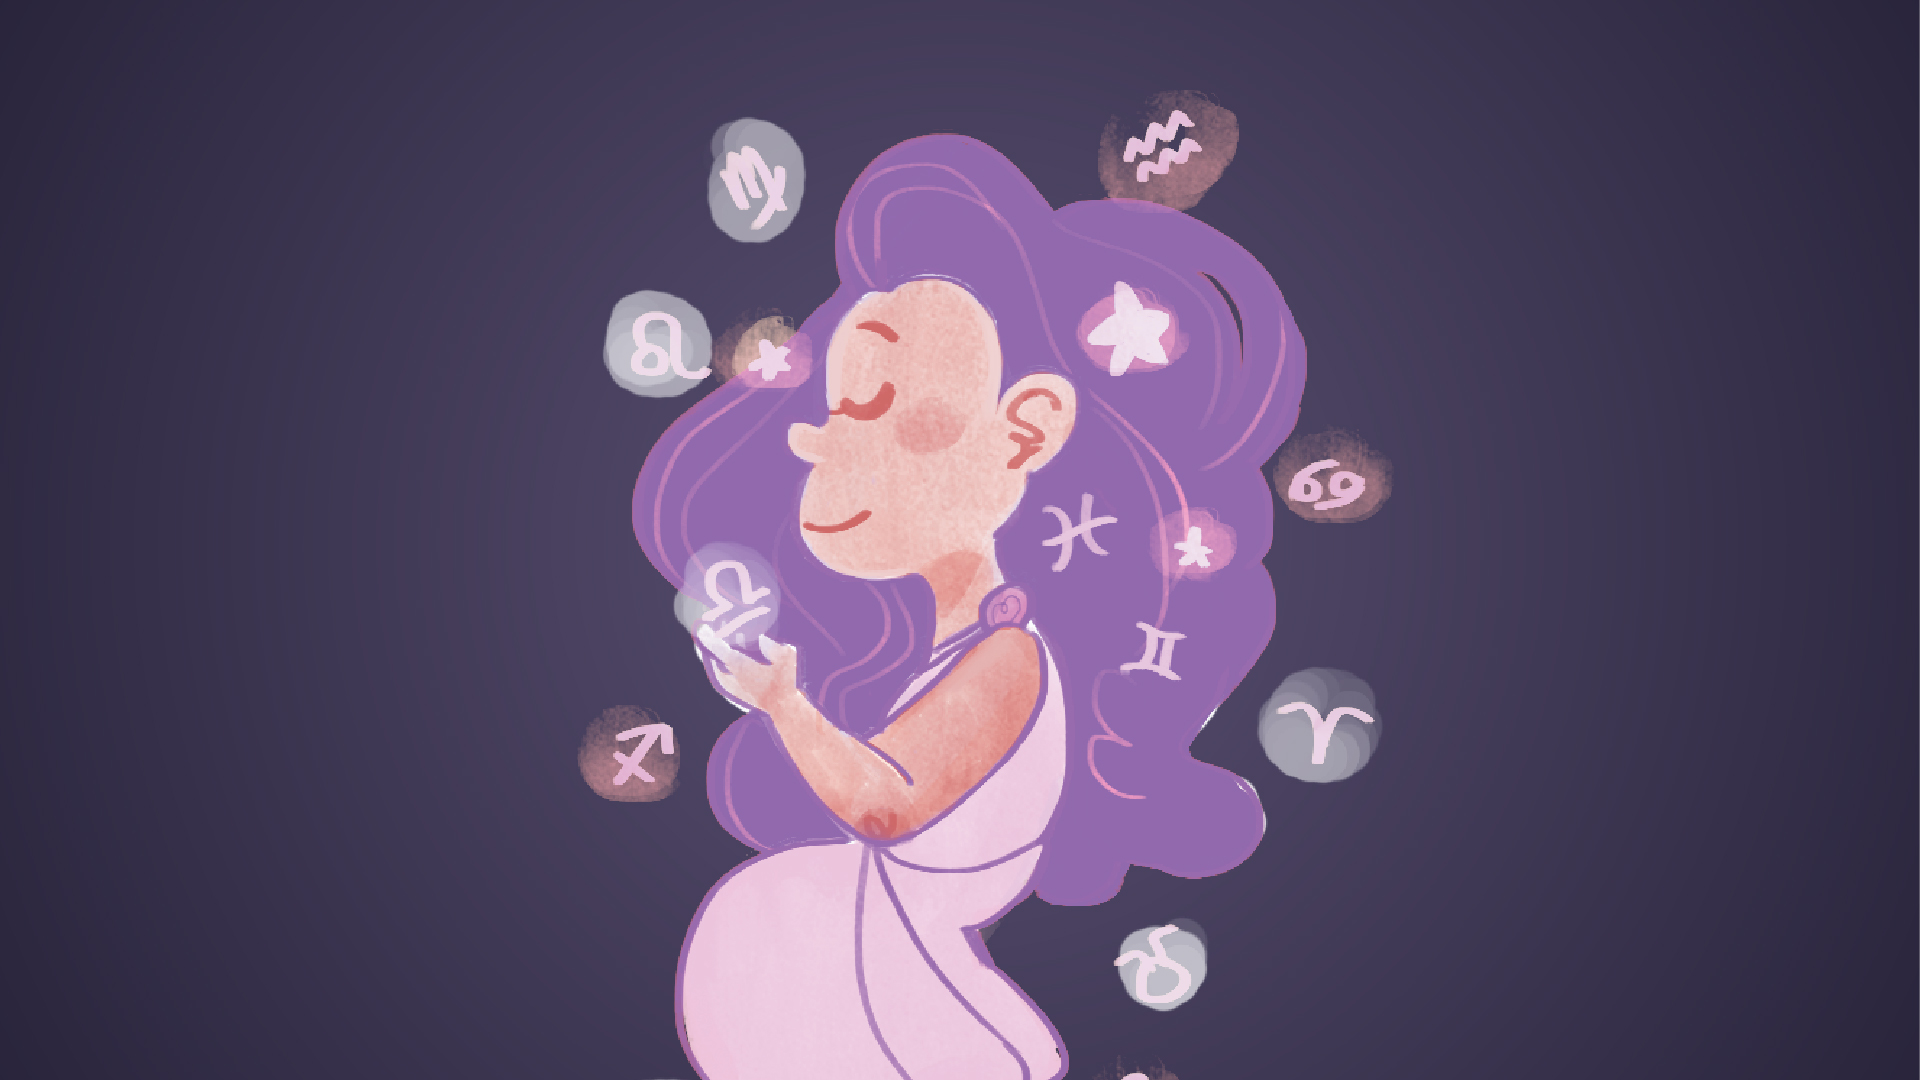 An illustration of a girl, stars and astrological signs strewn in her hair.